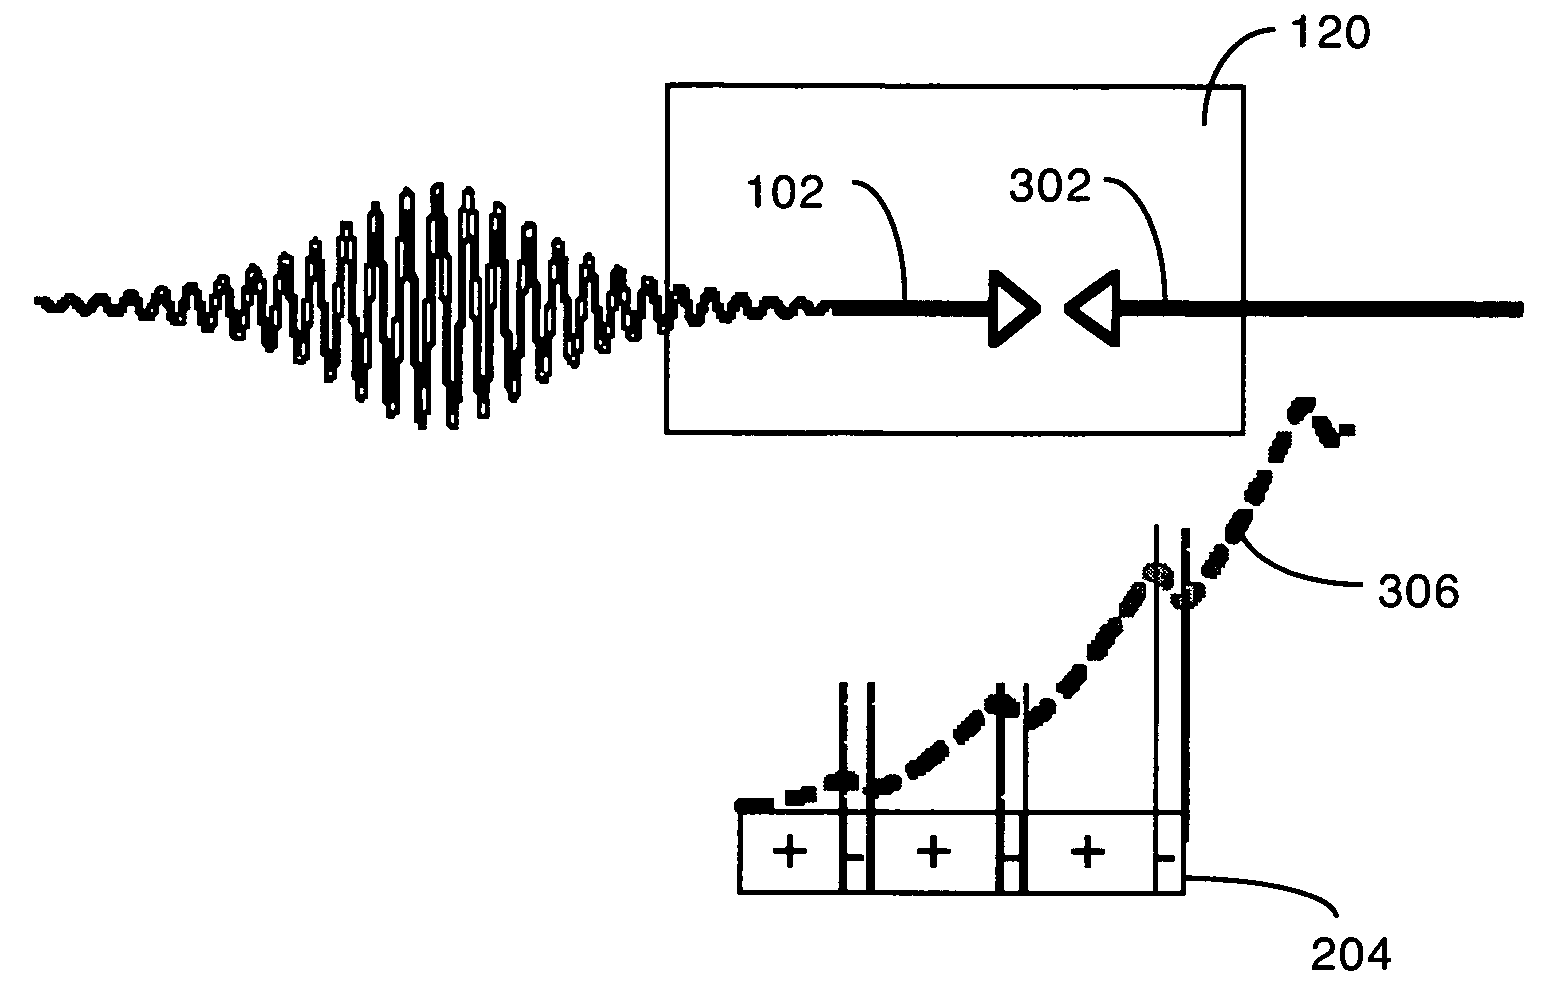 Phase matching of high order harmonic generation using dynamic phase modulation caused by a non-collinear modulation pulse